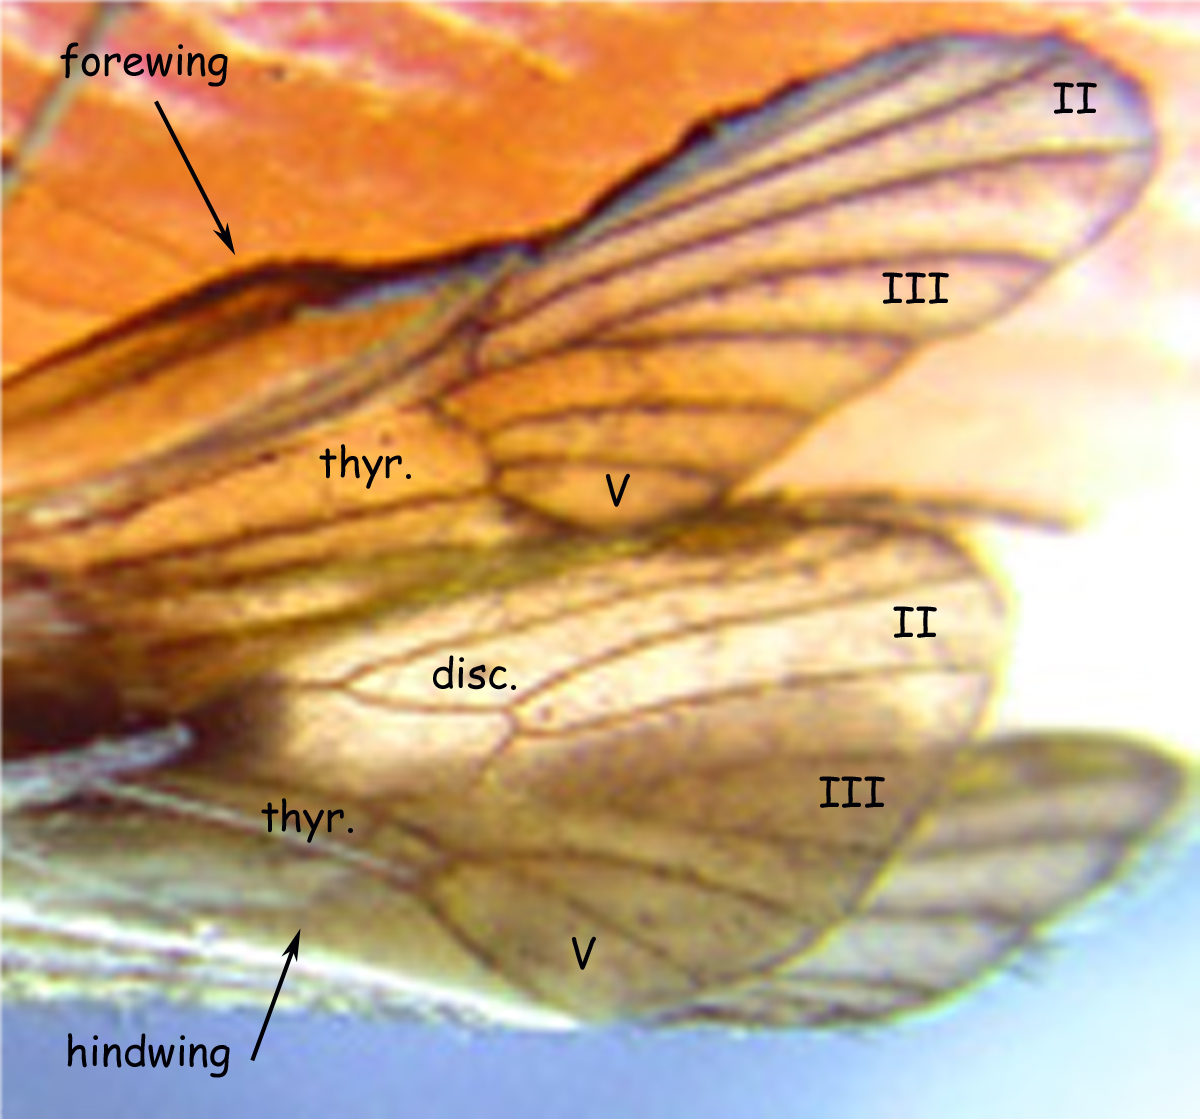 Portion of probable Apatania wings